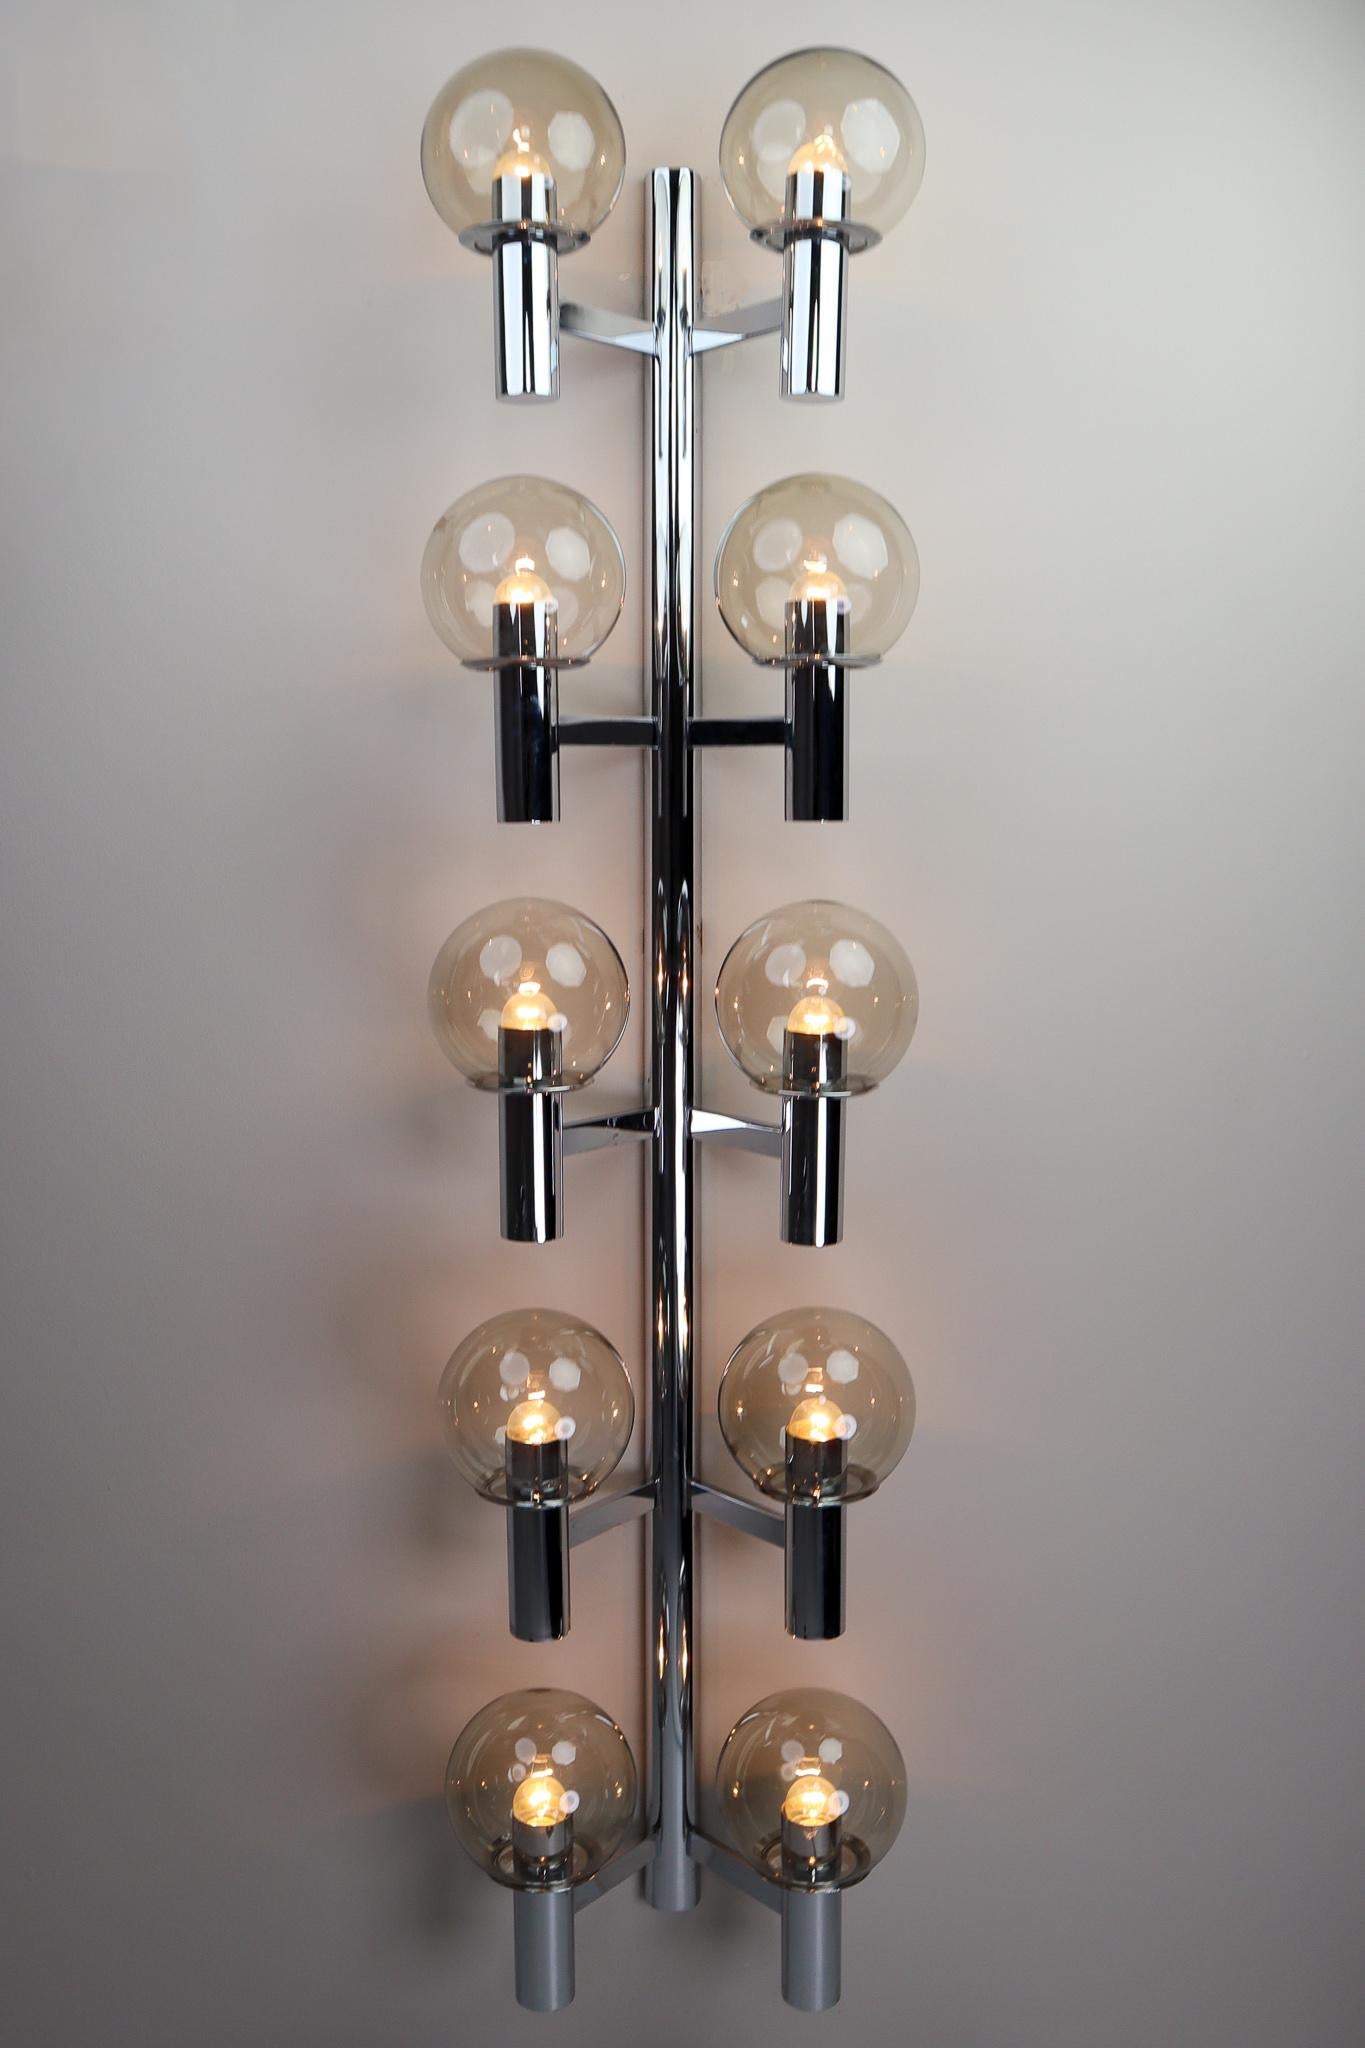 Large midcentury modern chrome wall lights- sculptures produced in Italy 1970s. The pleasant light it spreads is very atmospheric, these wall scones or fixtures will contribute to a luxurious character of the (hotel-bar) interior. Perfect original